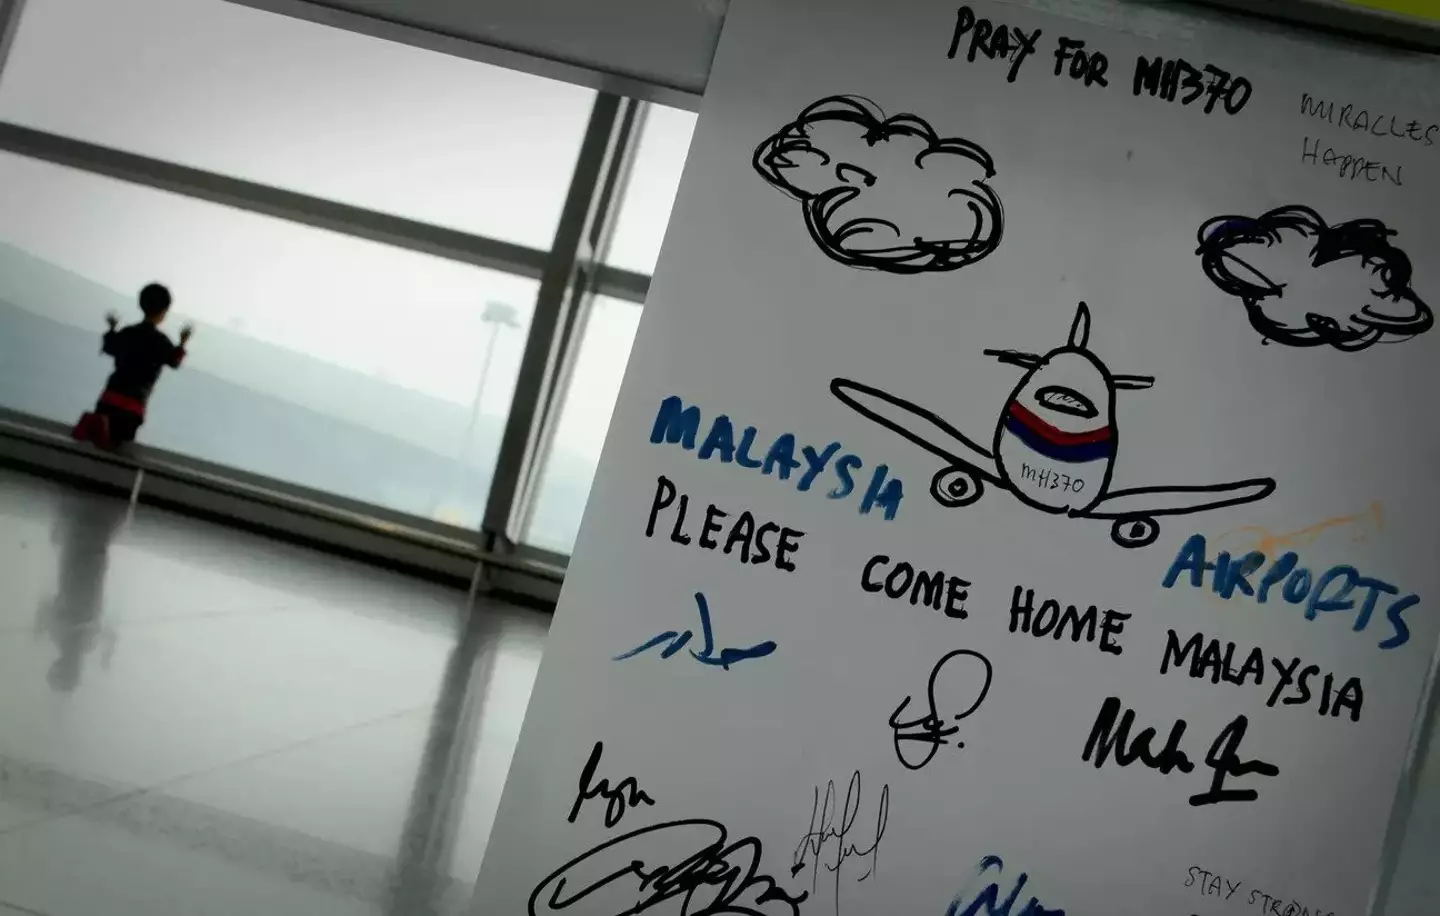 MH370 went missing in 2014.